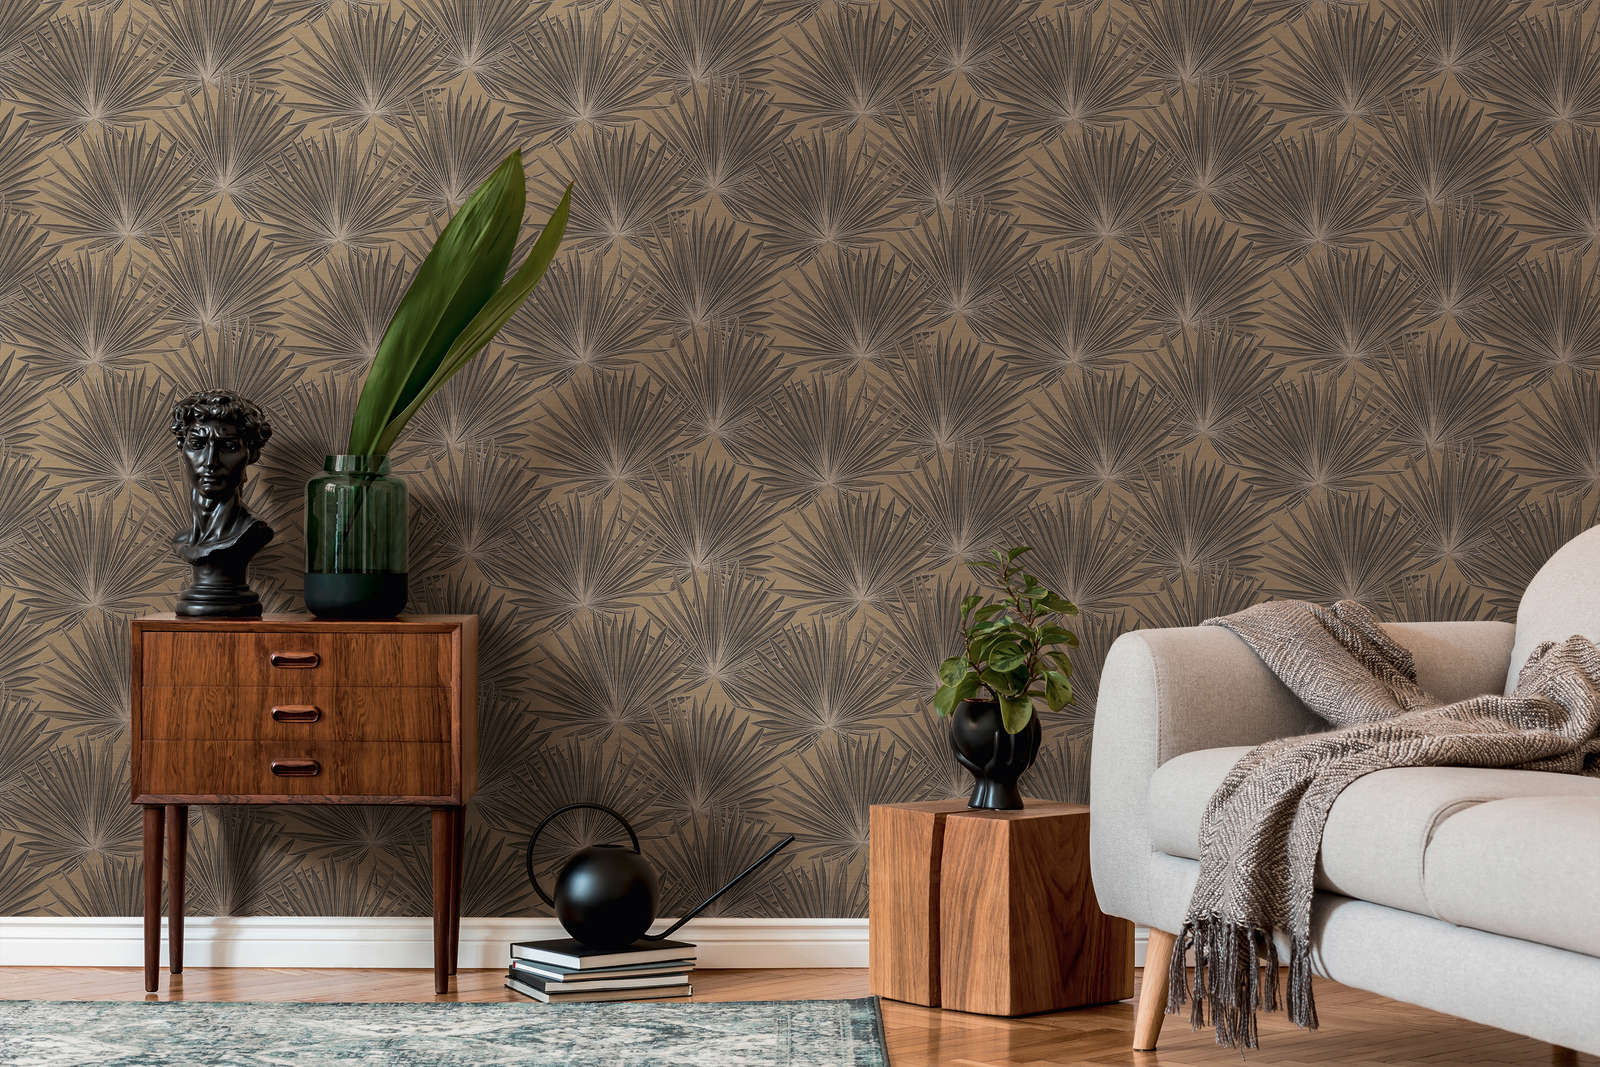             Non-woven wallpaper with palm leaves and glossy effect - brown, black
        